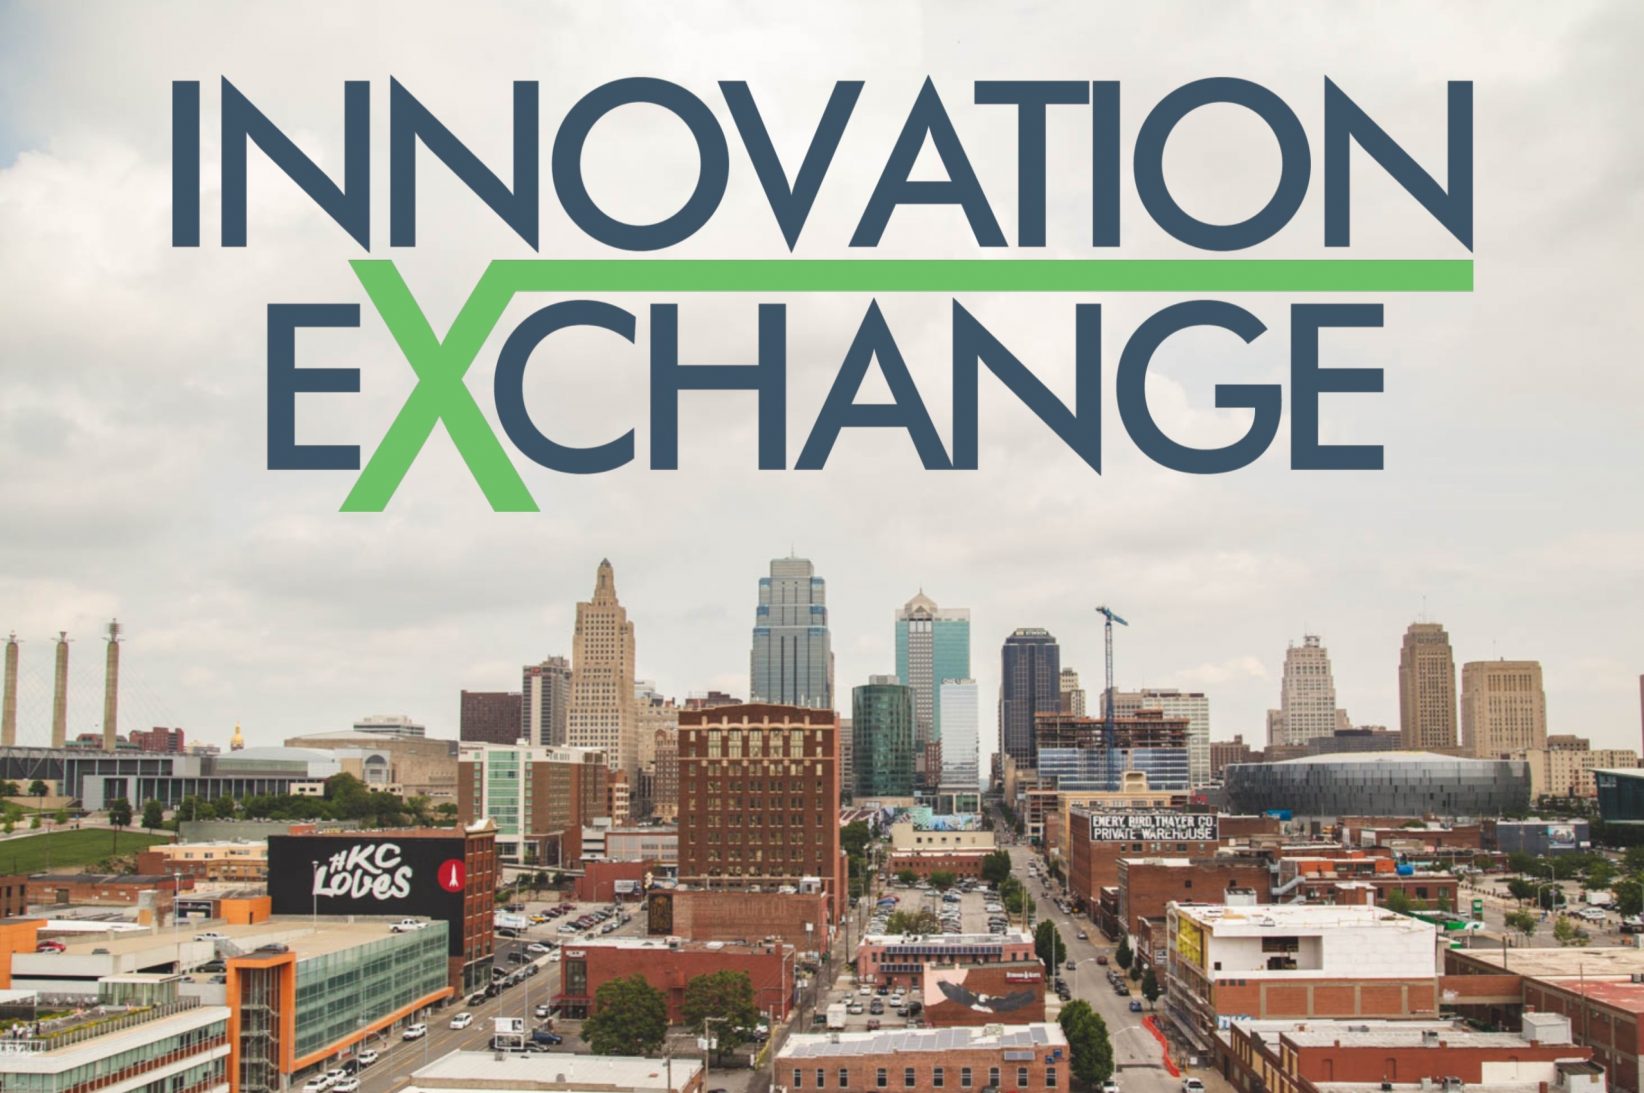 Innovation Exchange returns in 2018 with new partners, topics